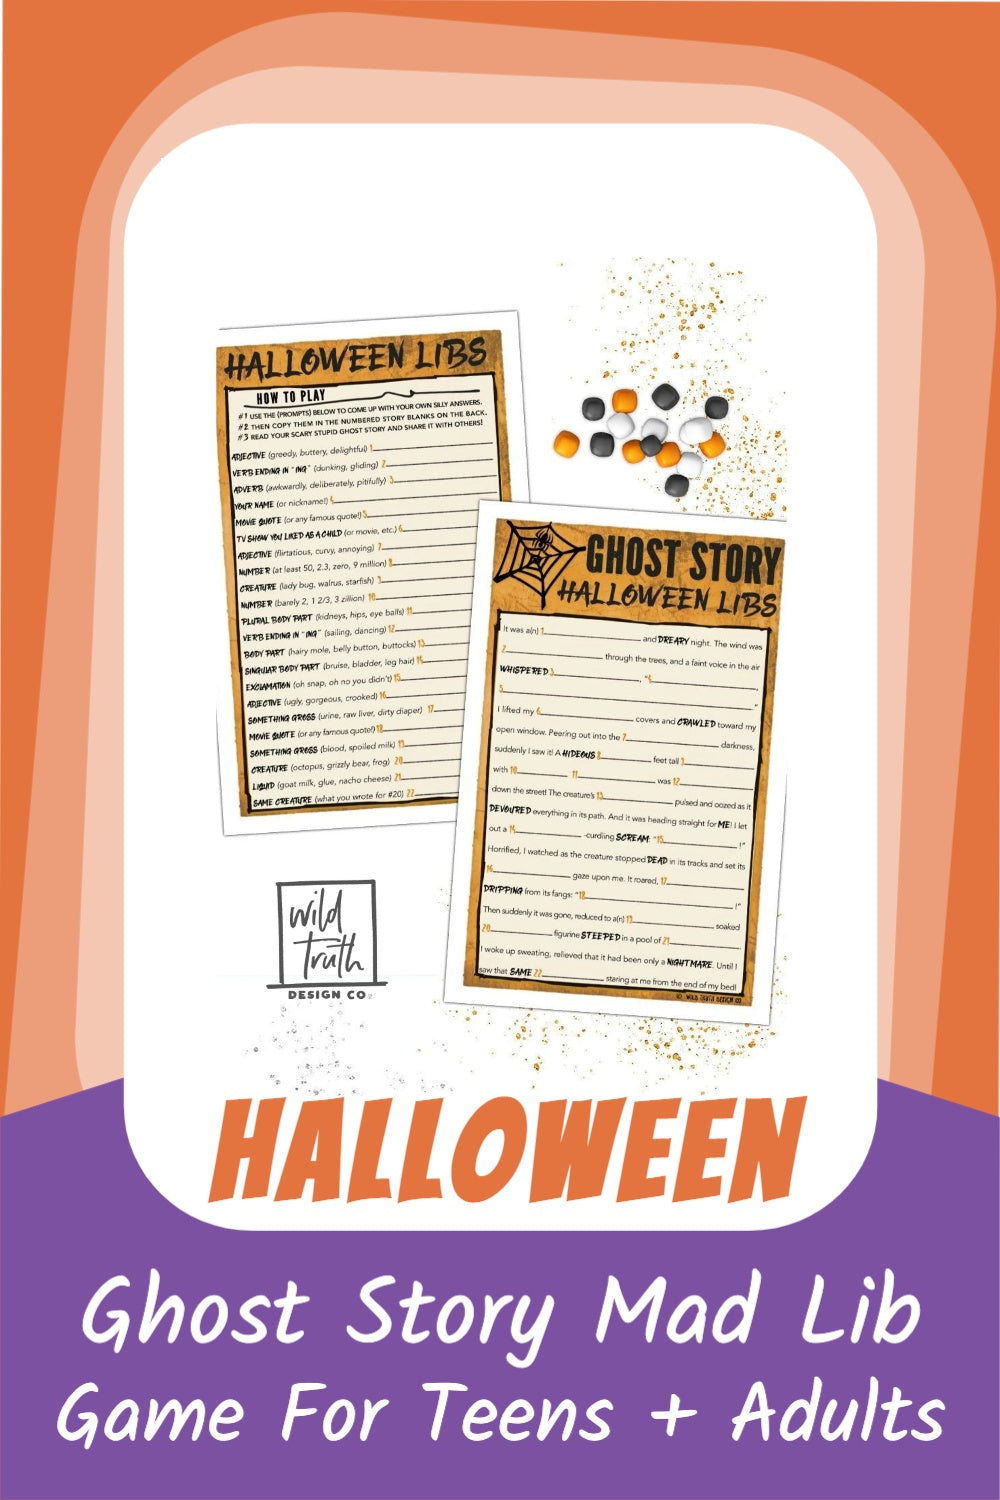 Ghost Story Halloween Mad Lib Game For Teens & Adults